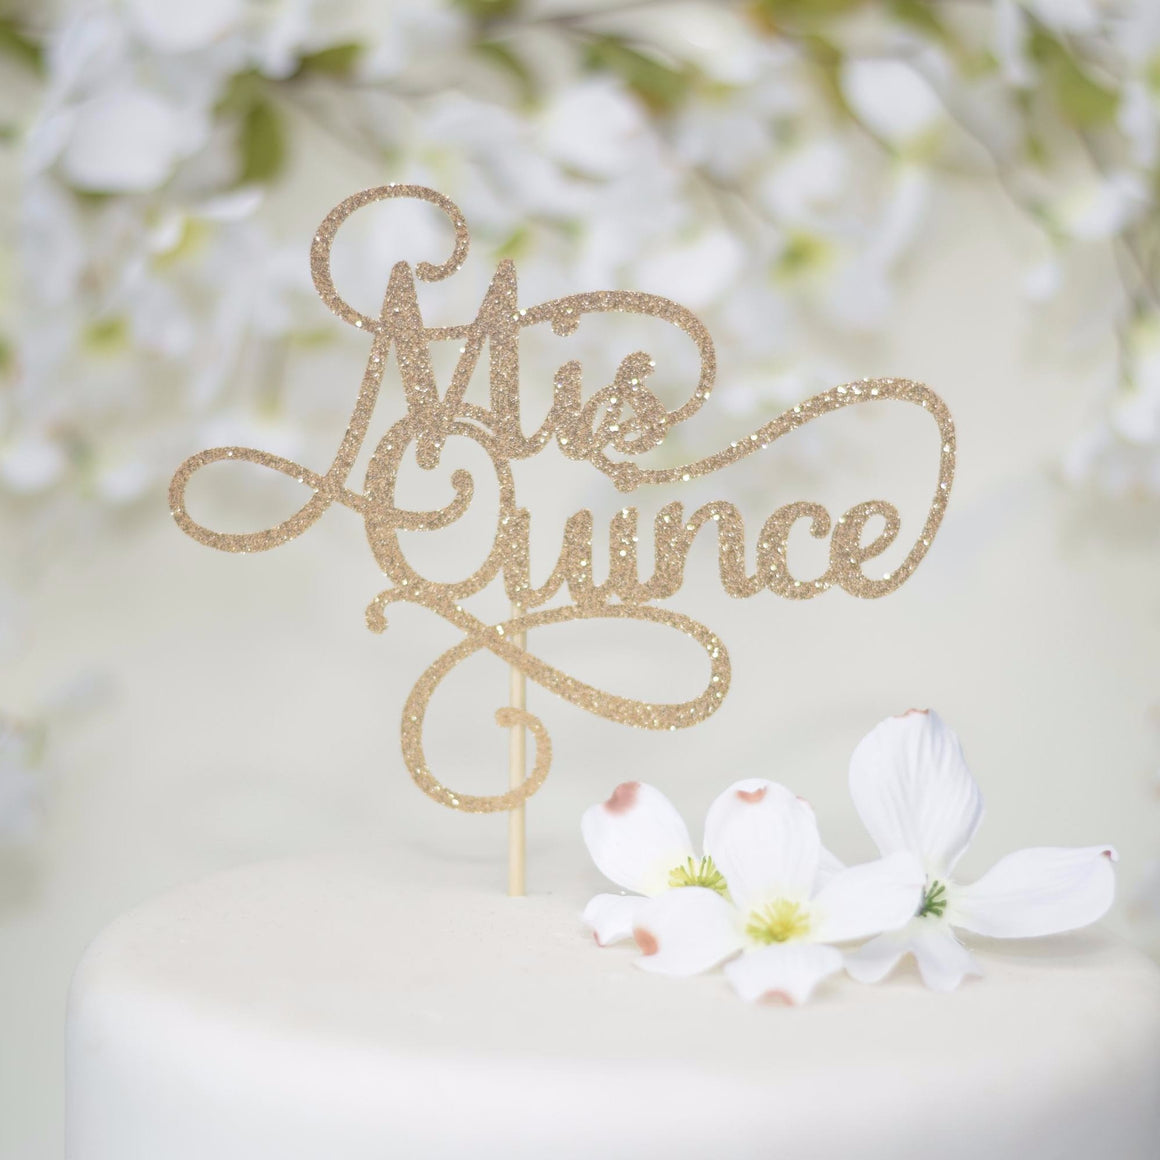 Mis Quince gold sparkle cake topper on white cake with white flowers